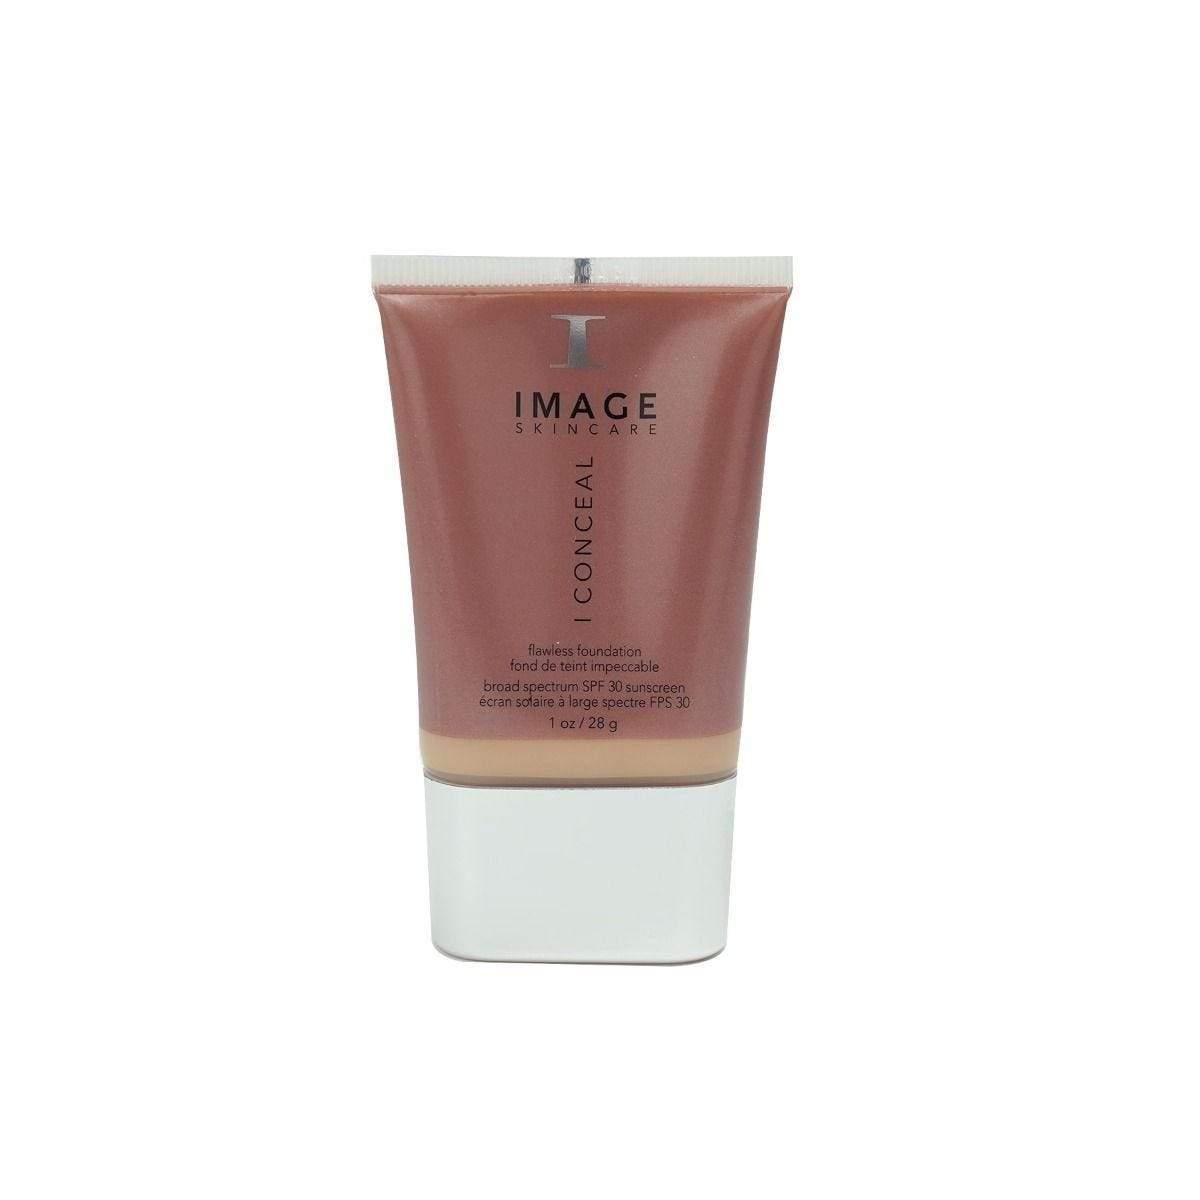 I CONCEAL flawless foundation broad-spectrum SPF 30 sunscreen porcelain